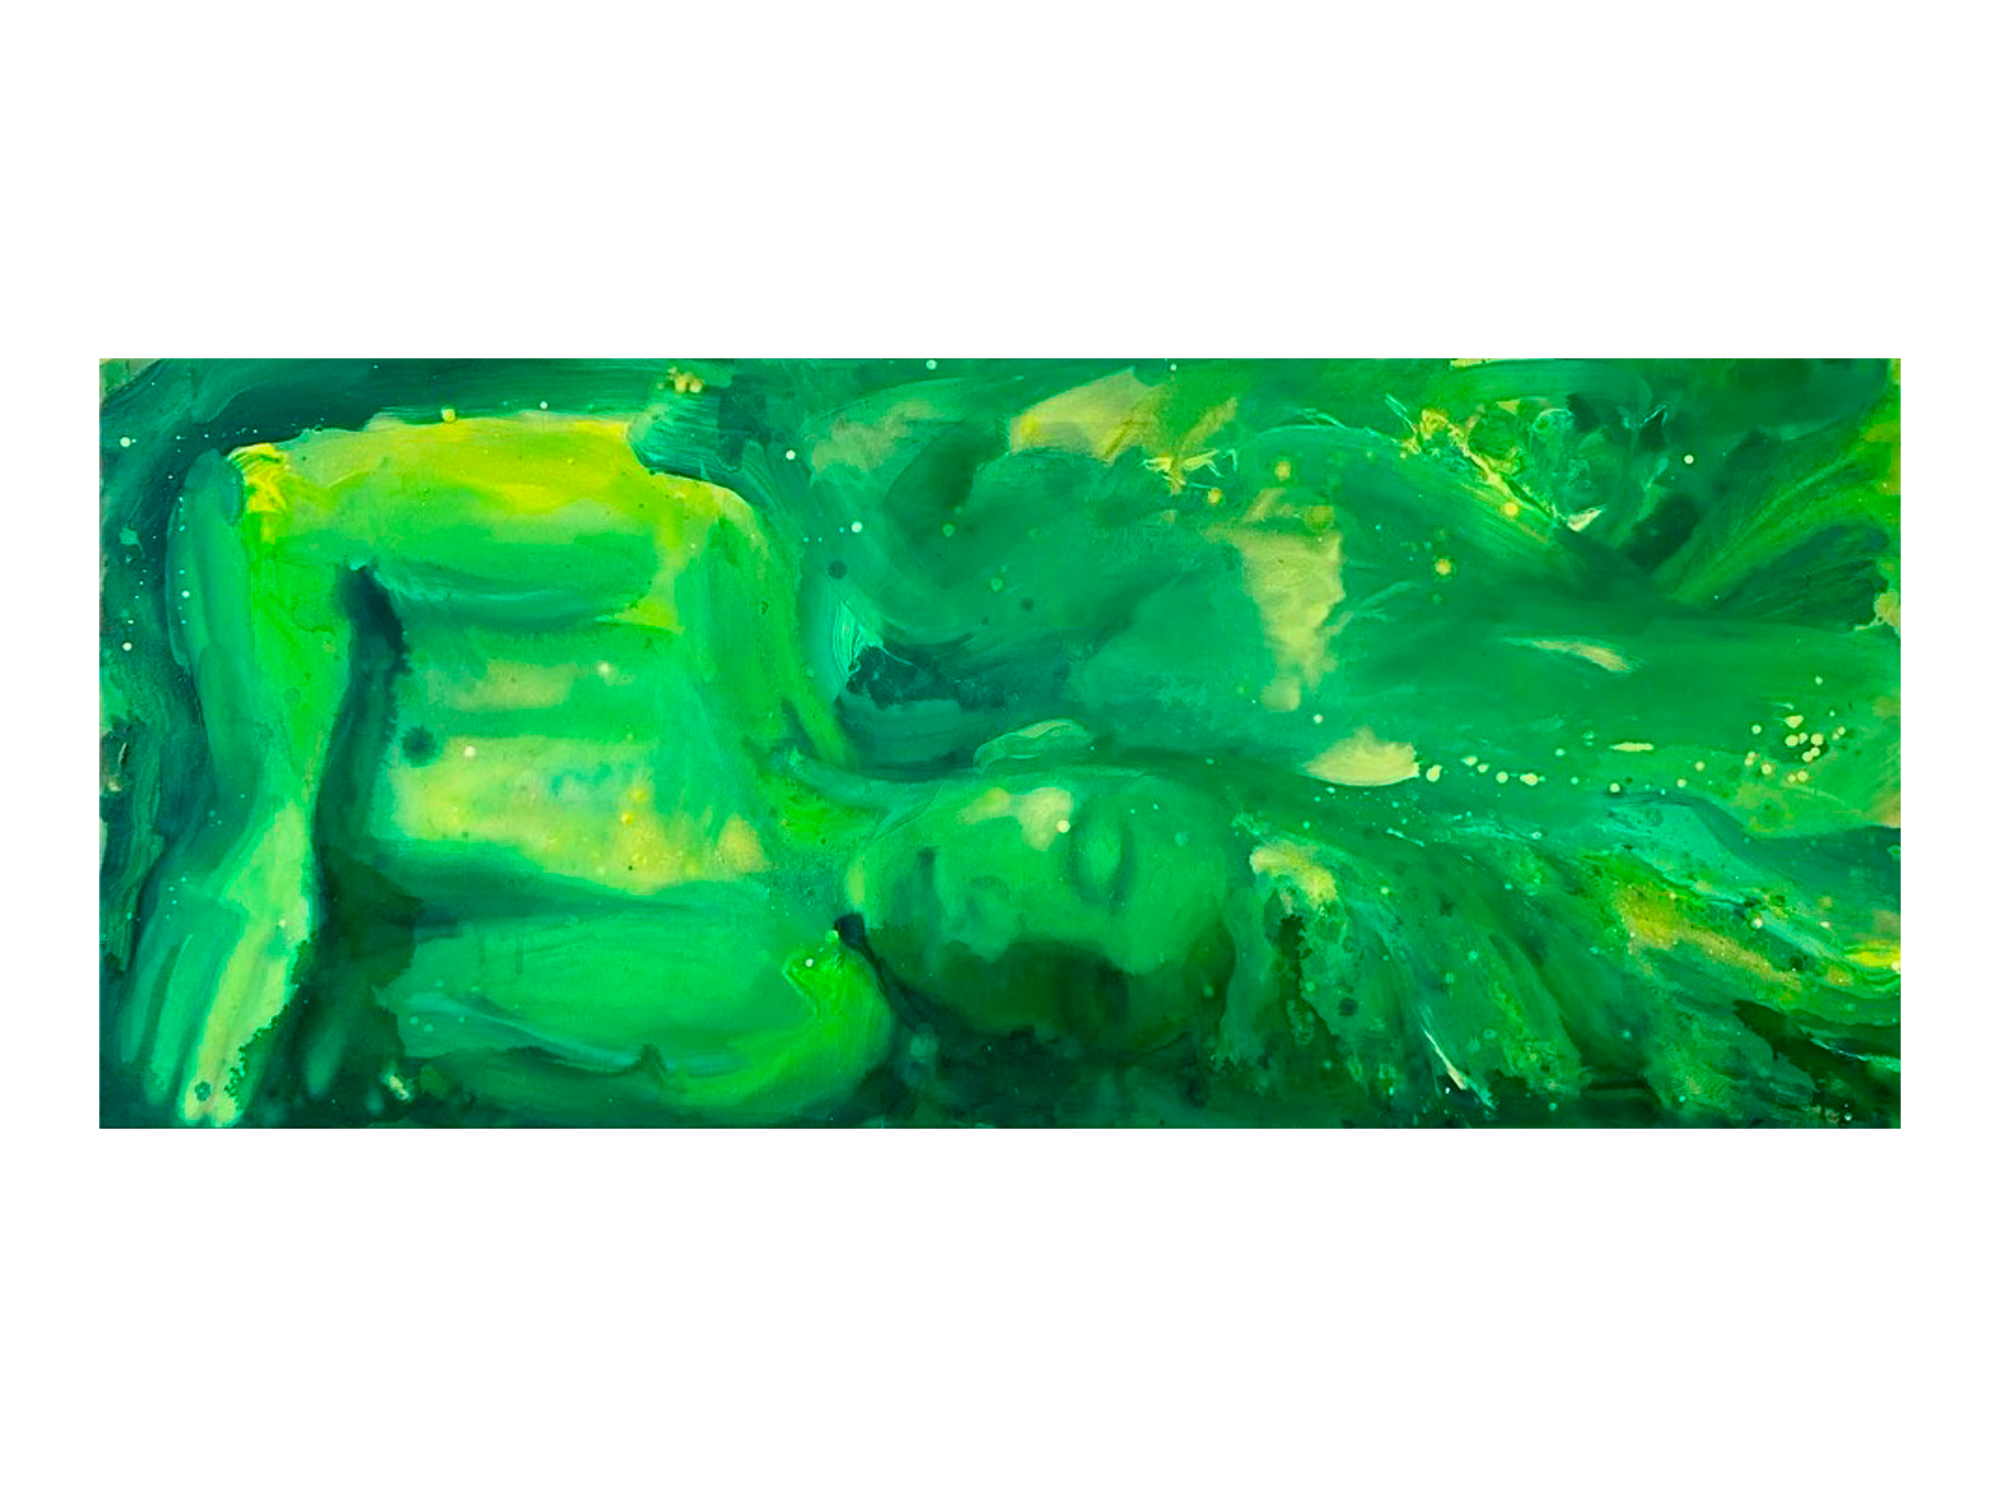   Dreams in green , oil paint and ink on canvas, 65 x 150 cm, 2022 